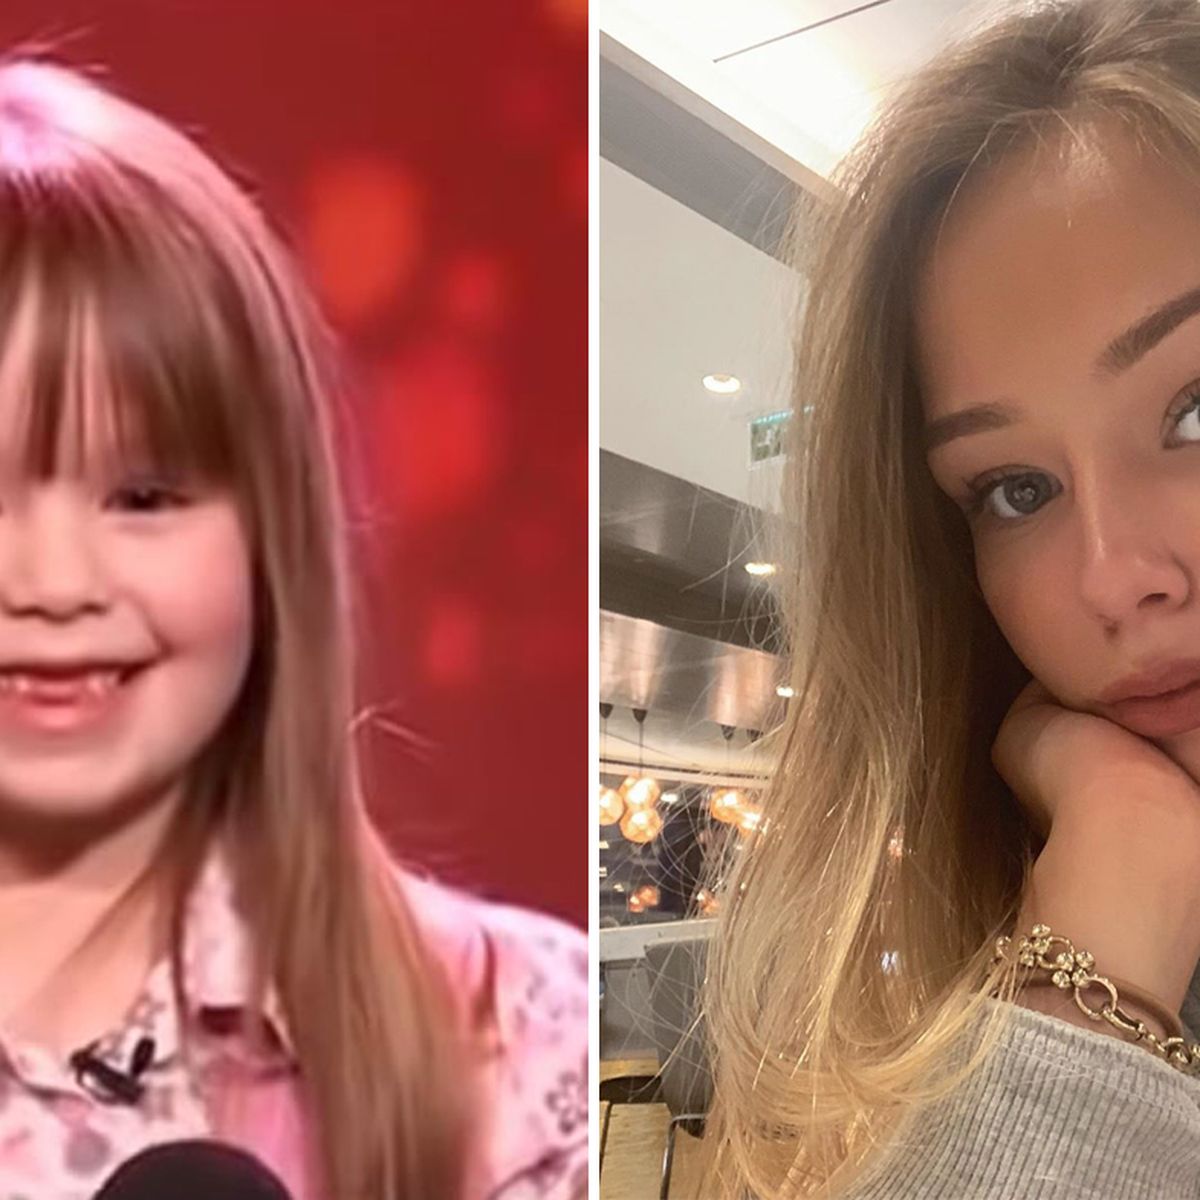 BGT The Champions fans stunned as Connie Talbot blows audience